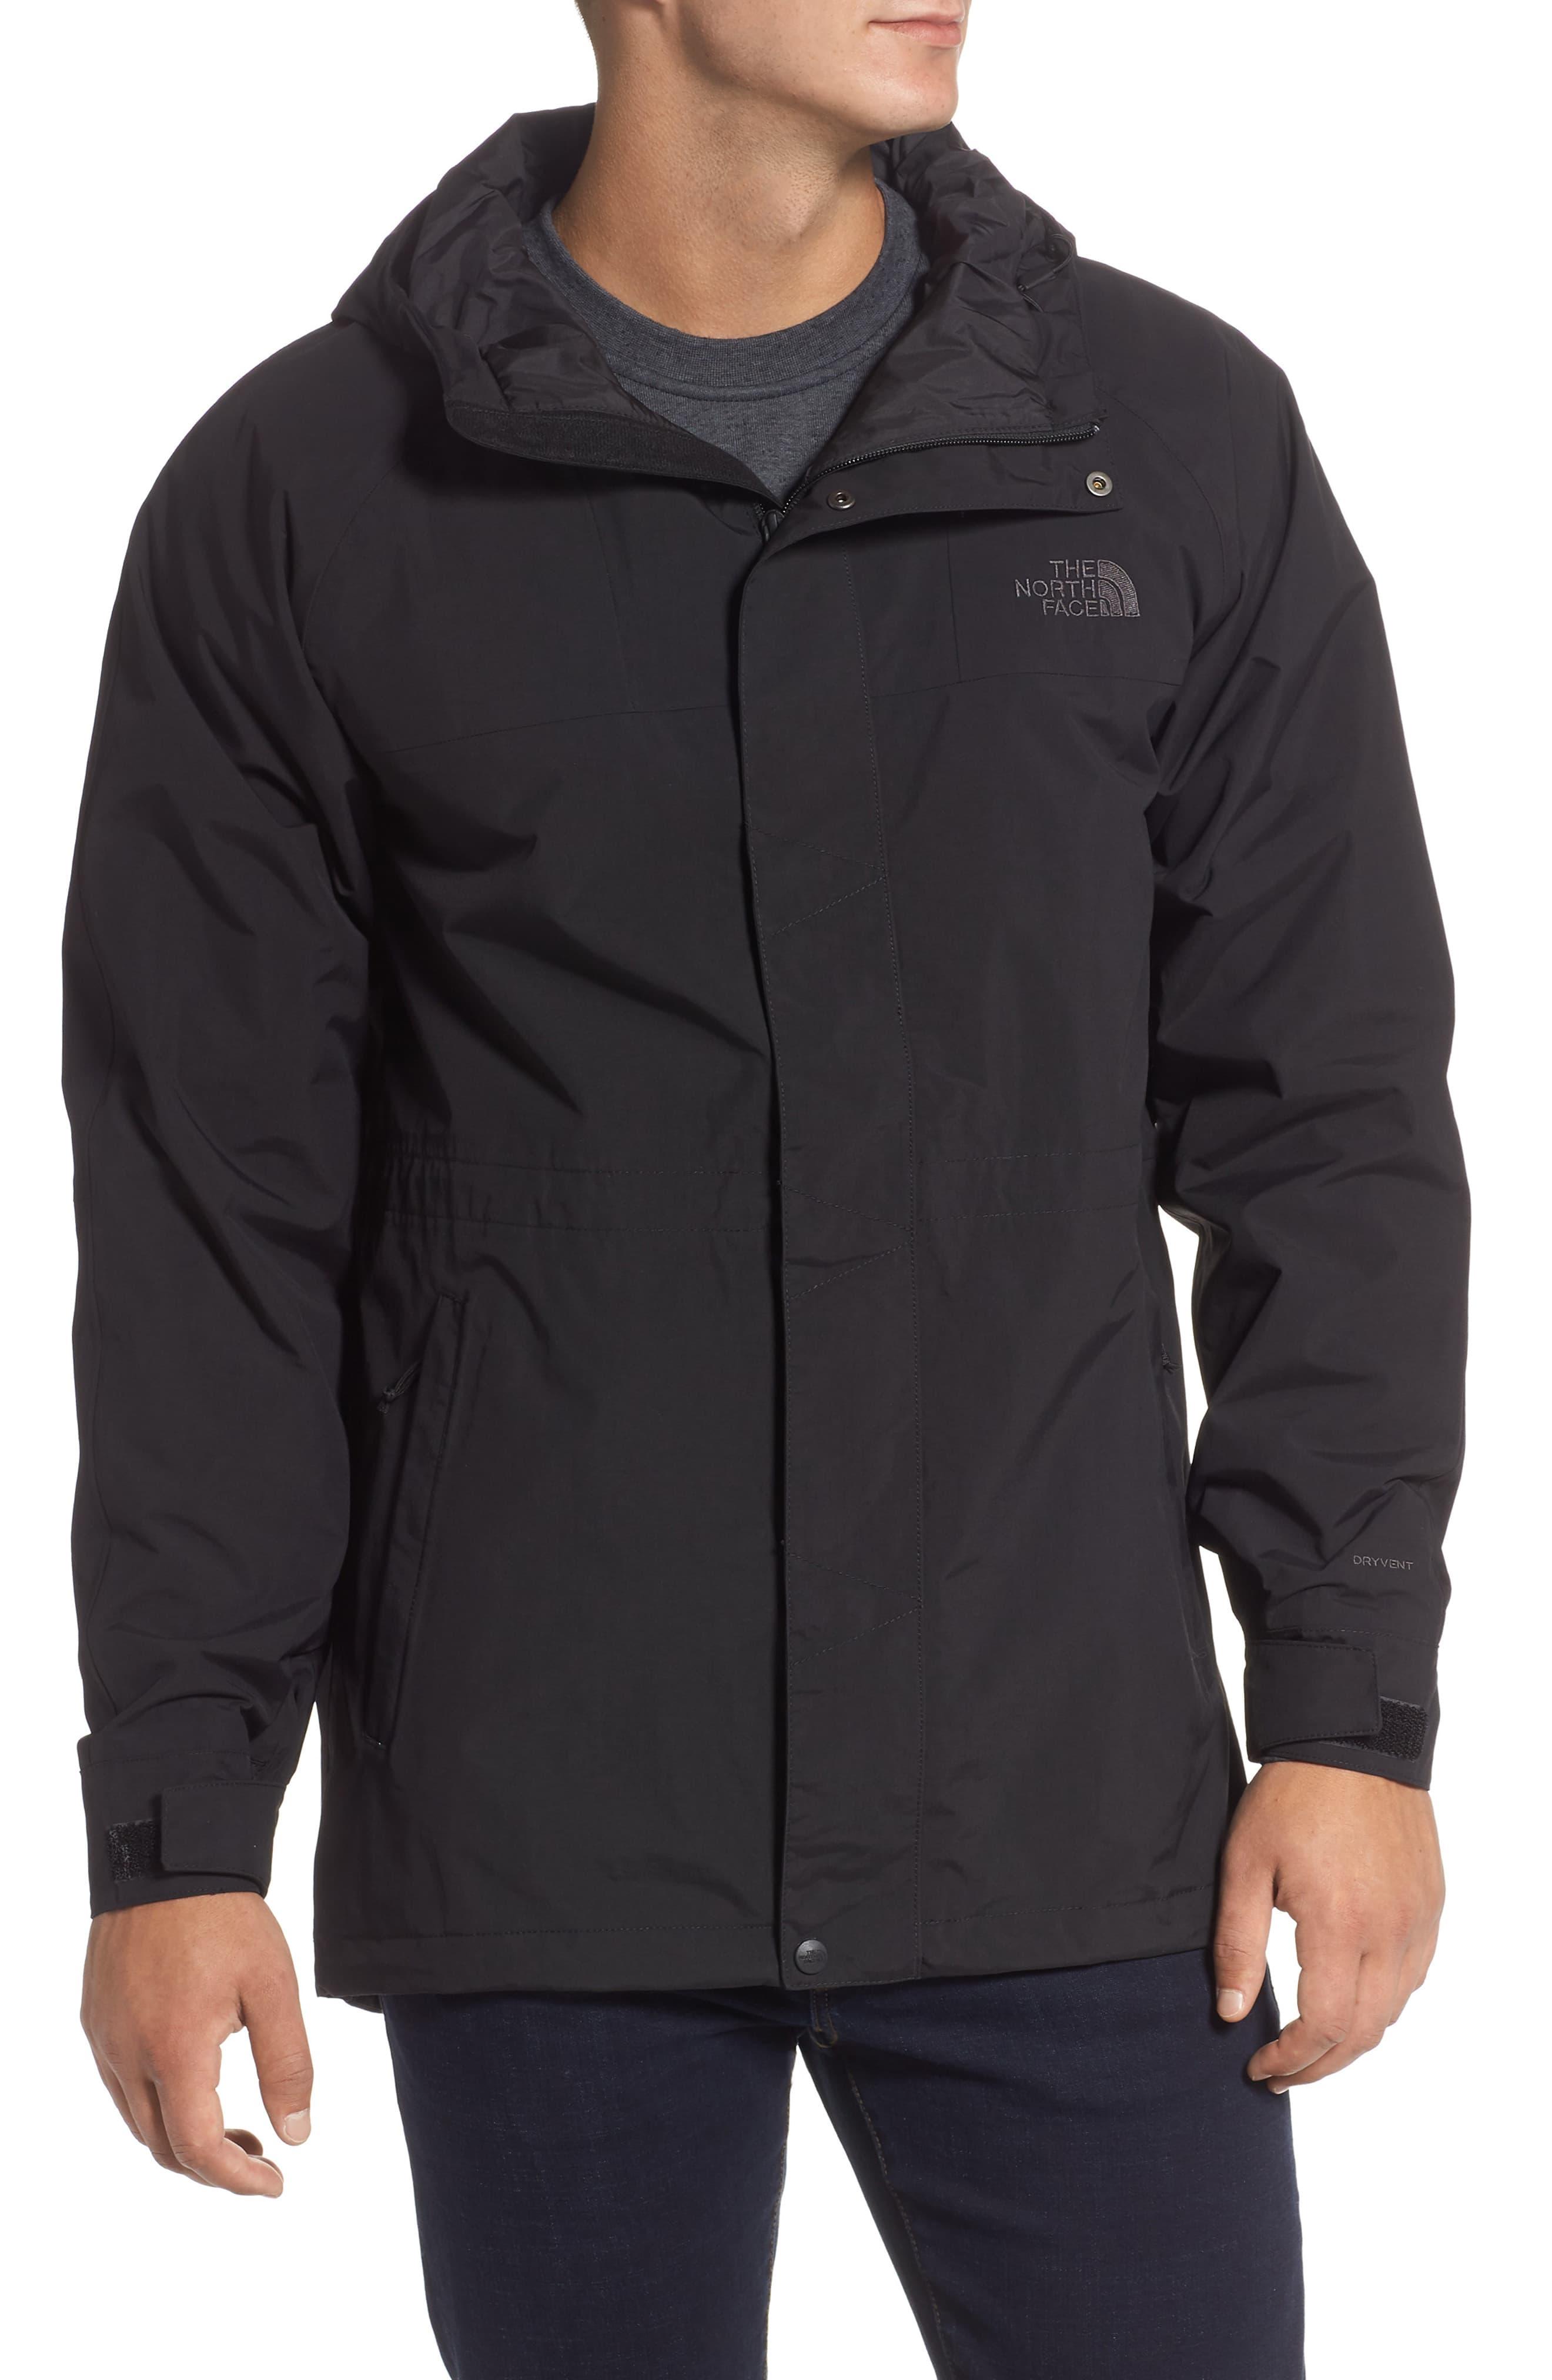 The North Face Synthetic City Breeze Rain Parka in Black for Men - Lyst